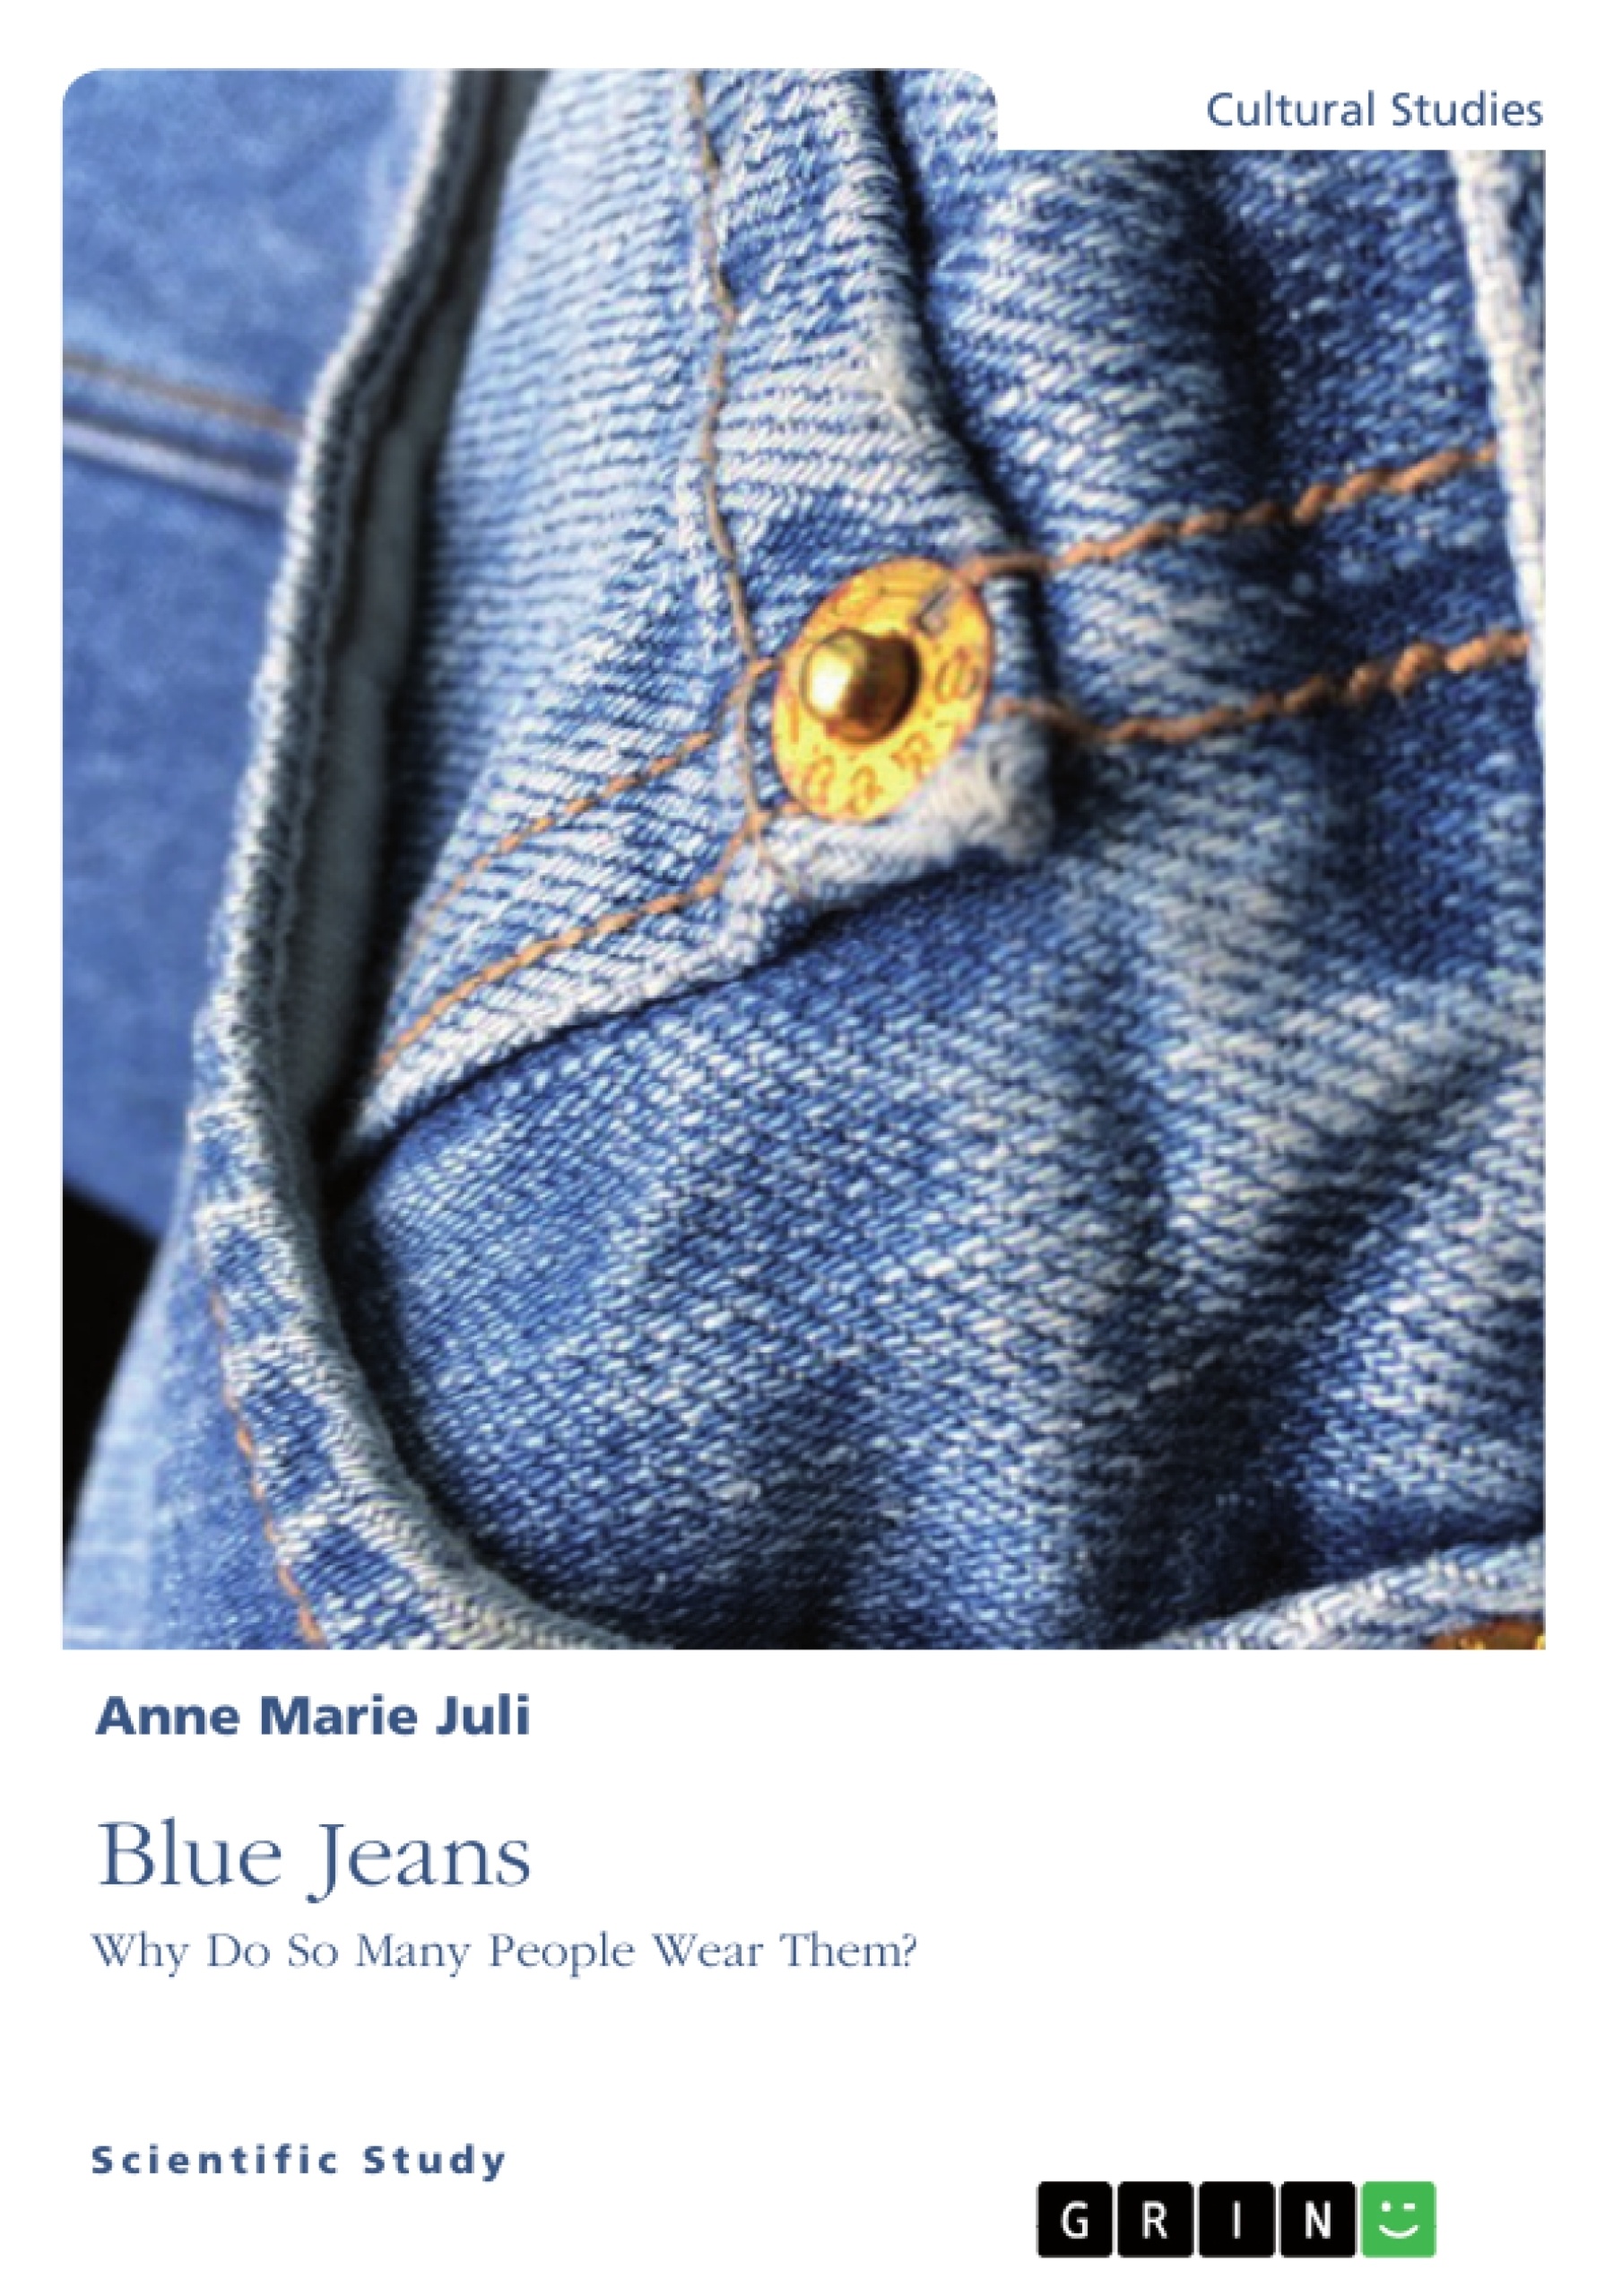 Titre: Blue Jeans. Why Do So Many People Wear Them?